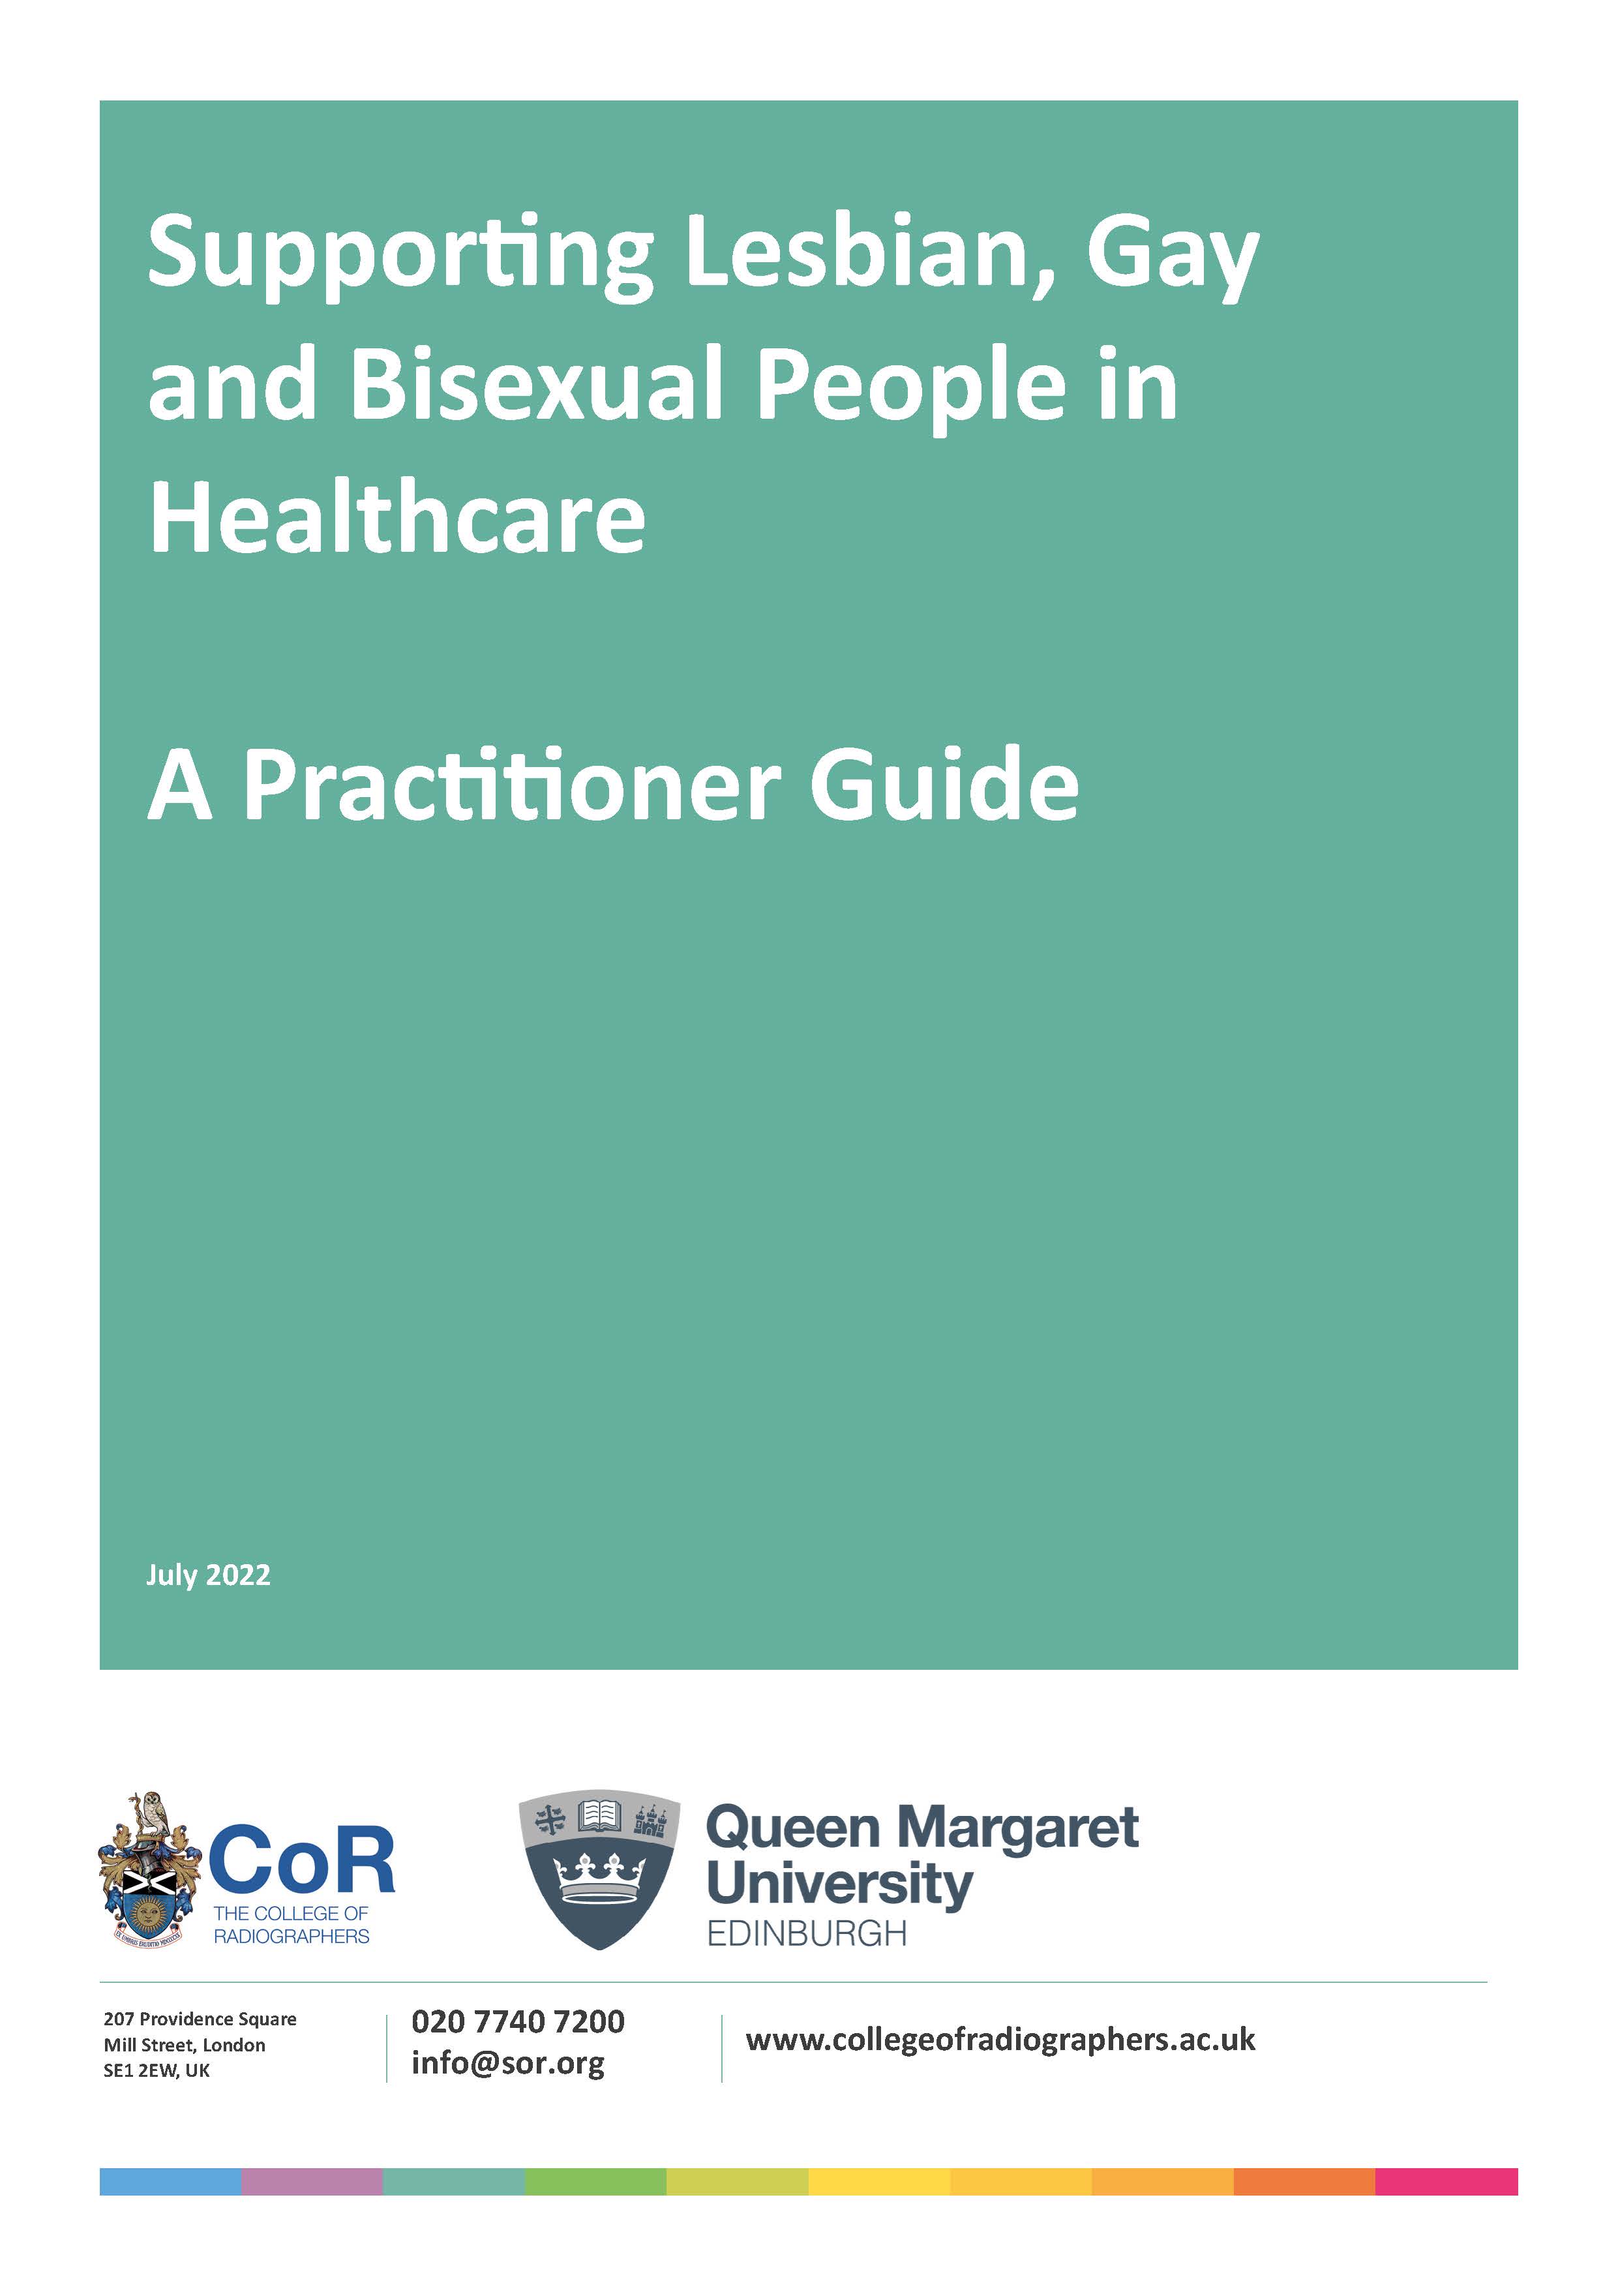 Supporting Lesbian, Gay and Bisexual People in Healthcare: A Practitioner Guide